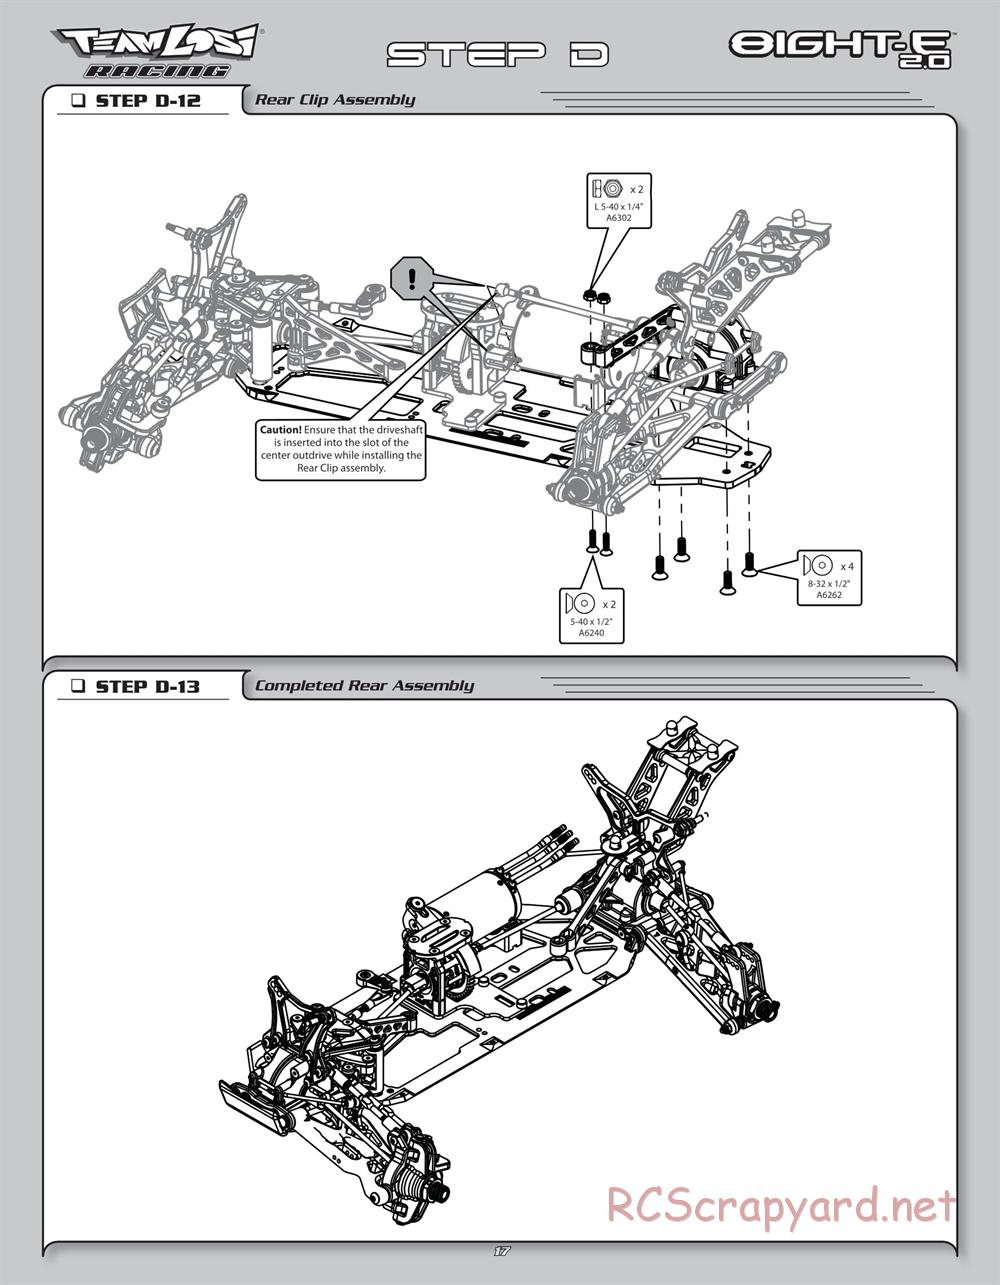 Team Losi - 8ight-E 2.0 Race Roller - Manual - Page 20